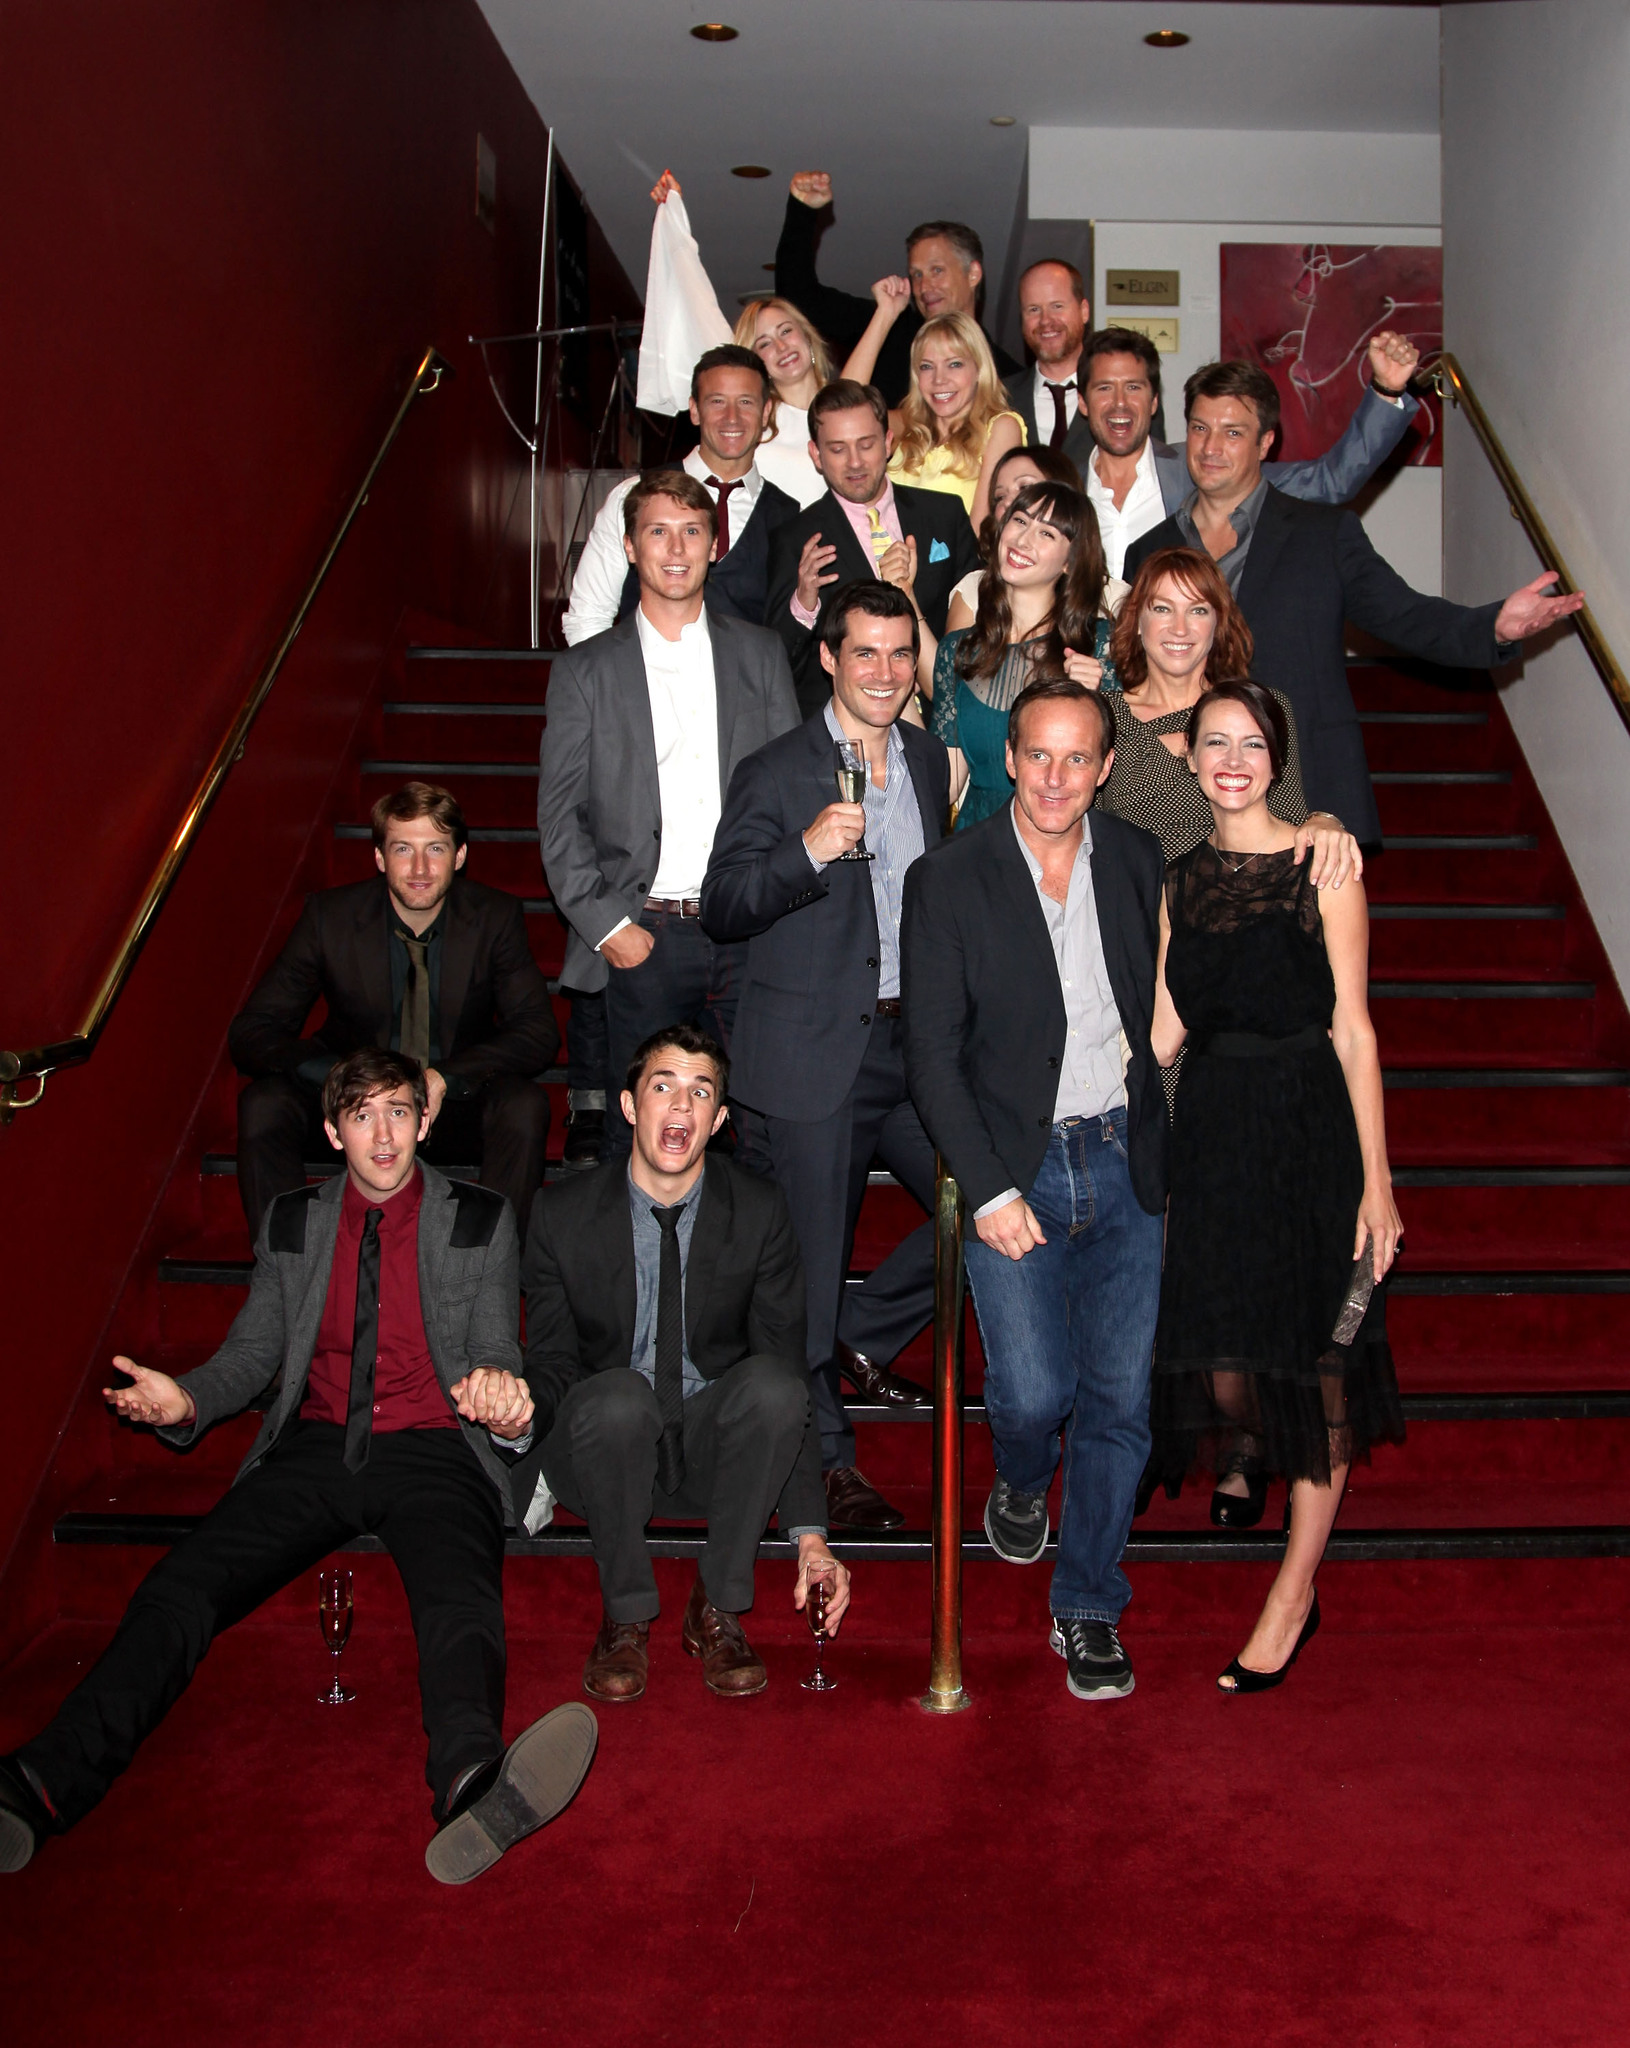 Amy Acker, Clark Gregg, Alexis Denisof, Reed Diamond, Nathan Fillion, Ashley Johnson, Fran Kranz, Tom Lenk, Sean Maher, Joss Whedon, Riki Lindhome, Nick Kocher, Brian McElhaney, Jillian Morgese and Kai Cole at event of Much Ado About Nothing (2012)